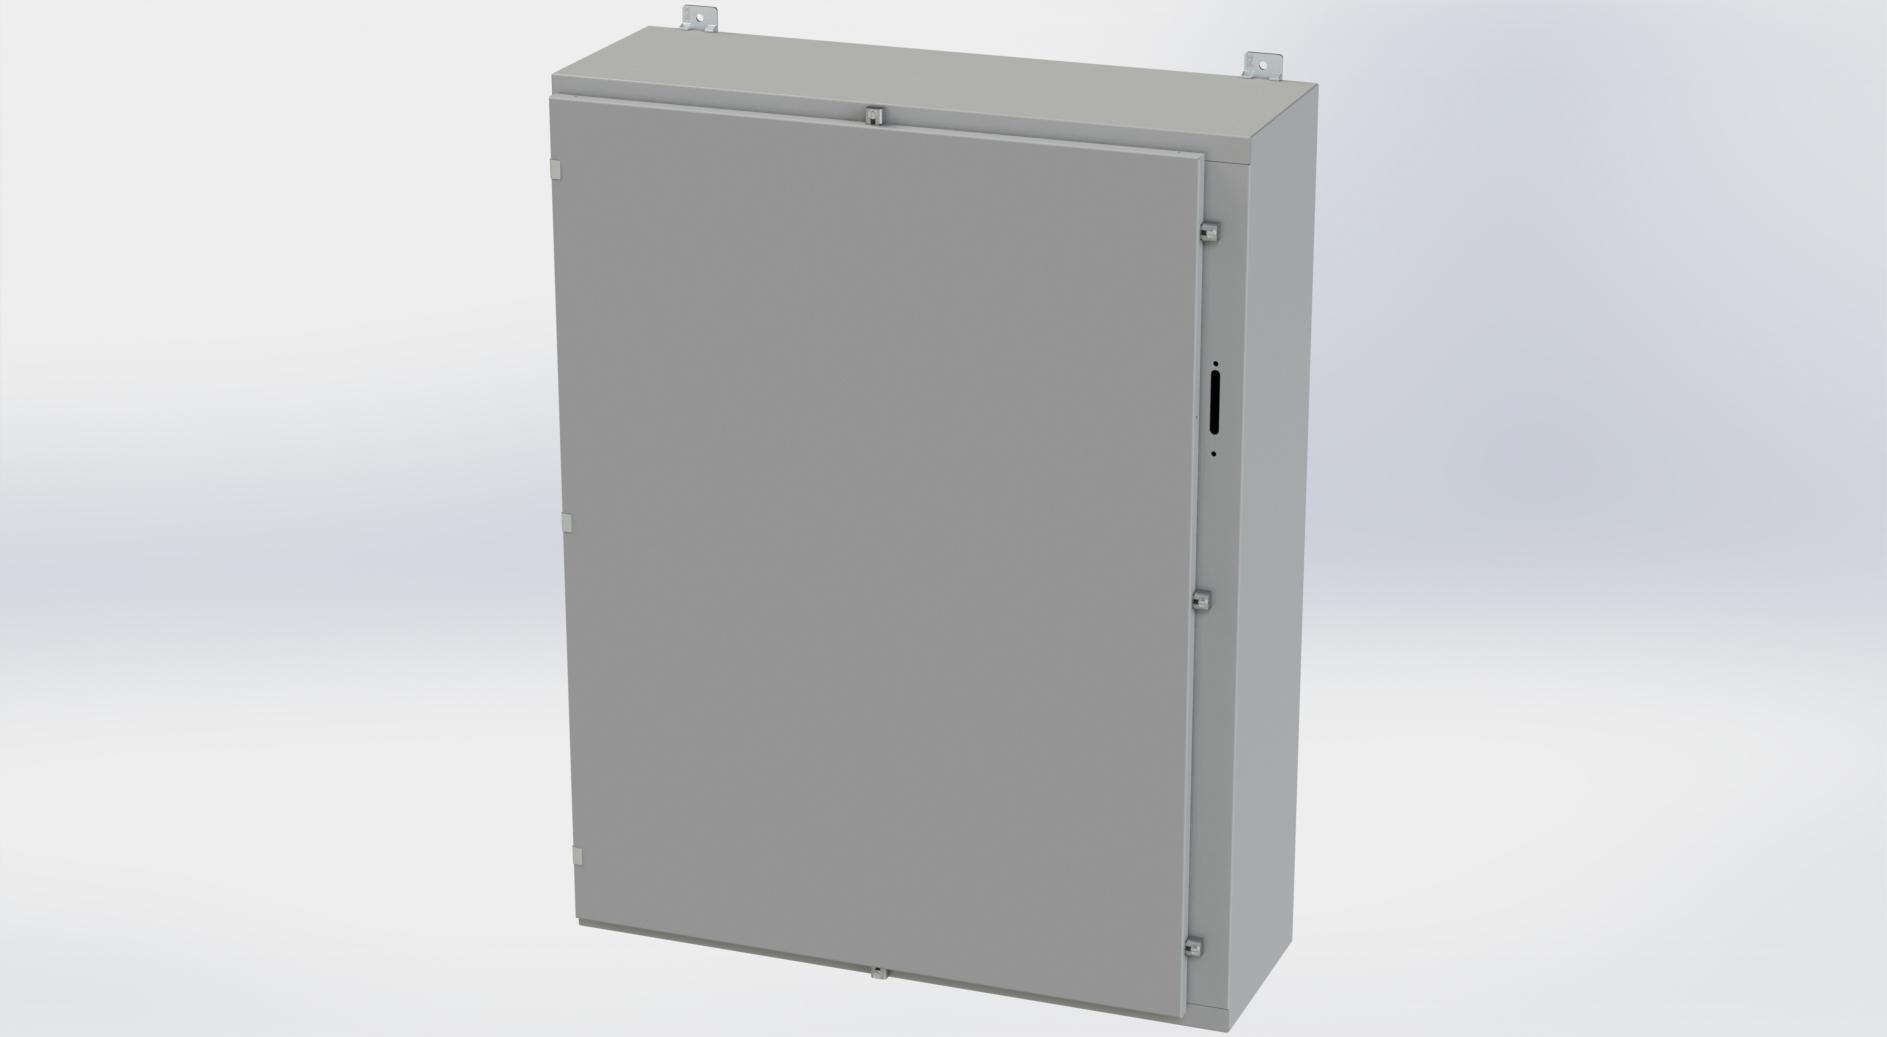 Saginaw Control SCE-48HS3712LP HS LP Enclosure, Height:48.00", Width:37.38", Depth:12.00", ANSI-61 gray powder coating inside and out. Optional sub-panels are powder coated white.